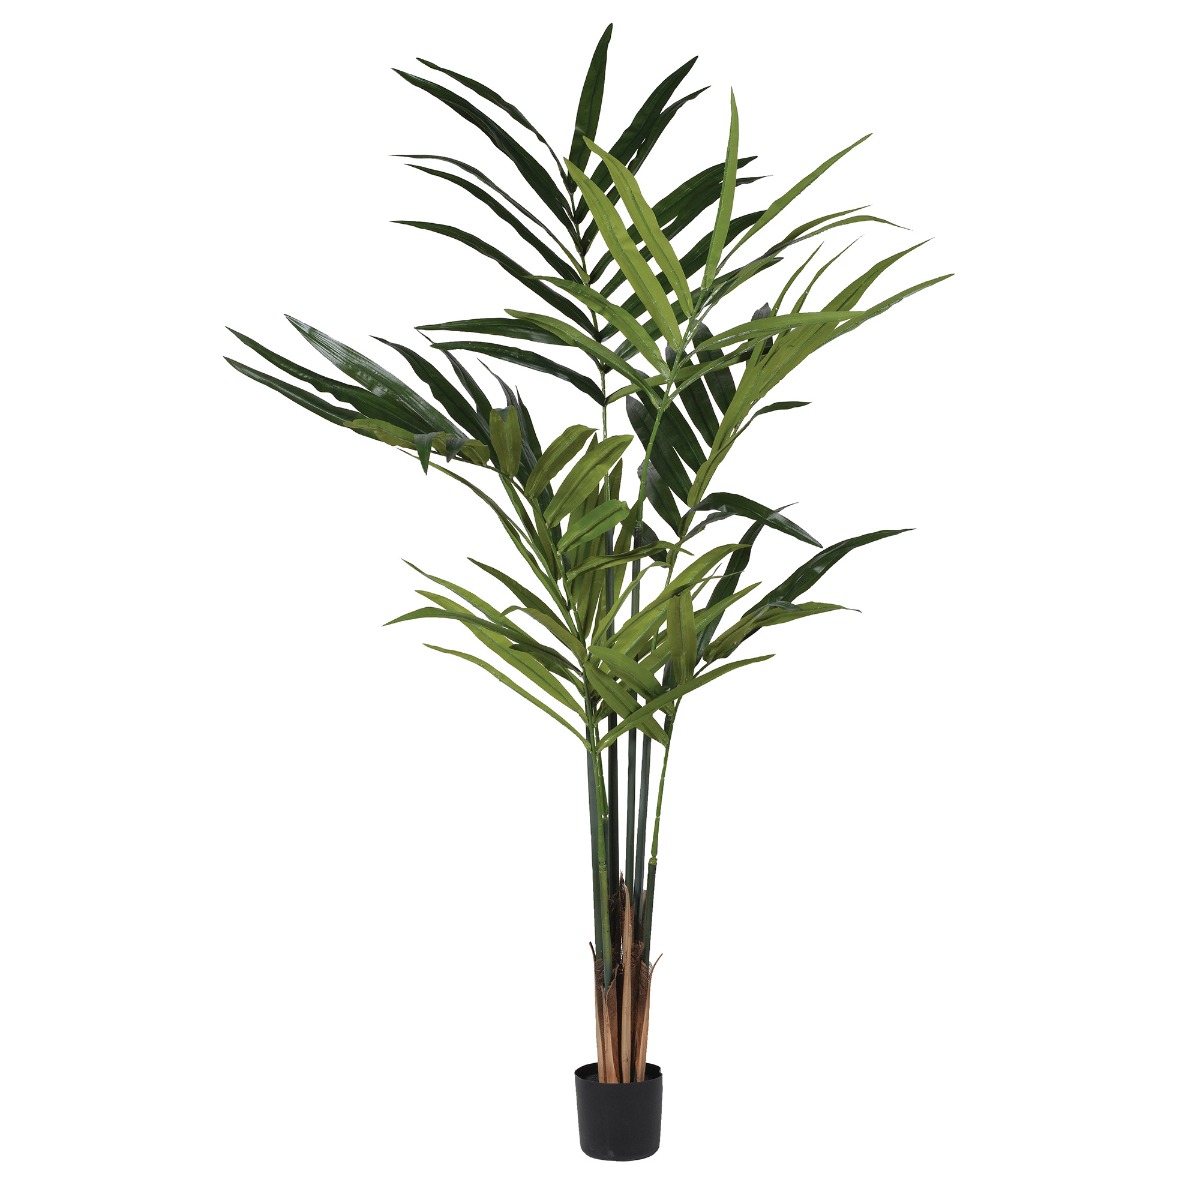 Lge Potted Palm, Green | Barker & Stonehouse